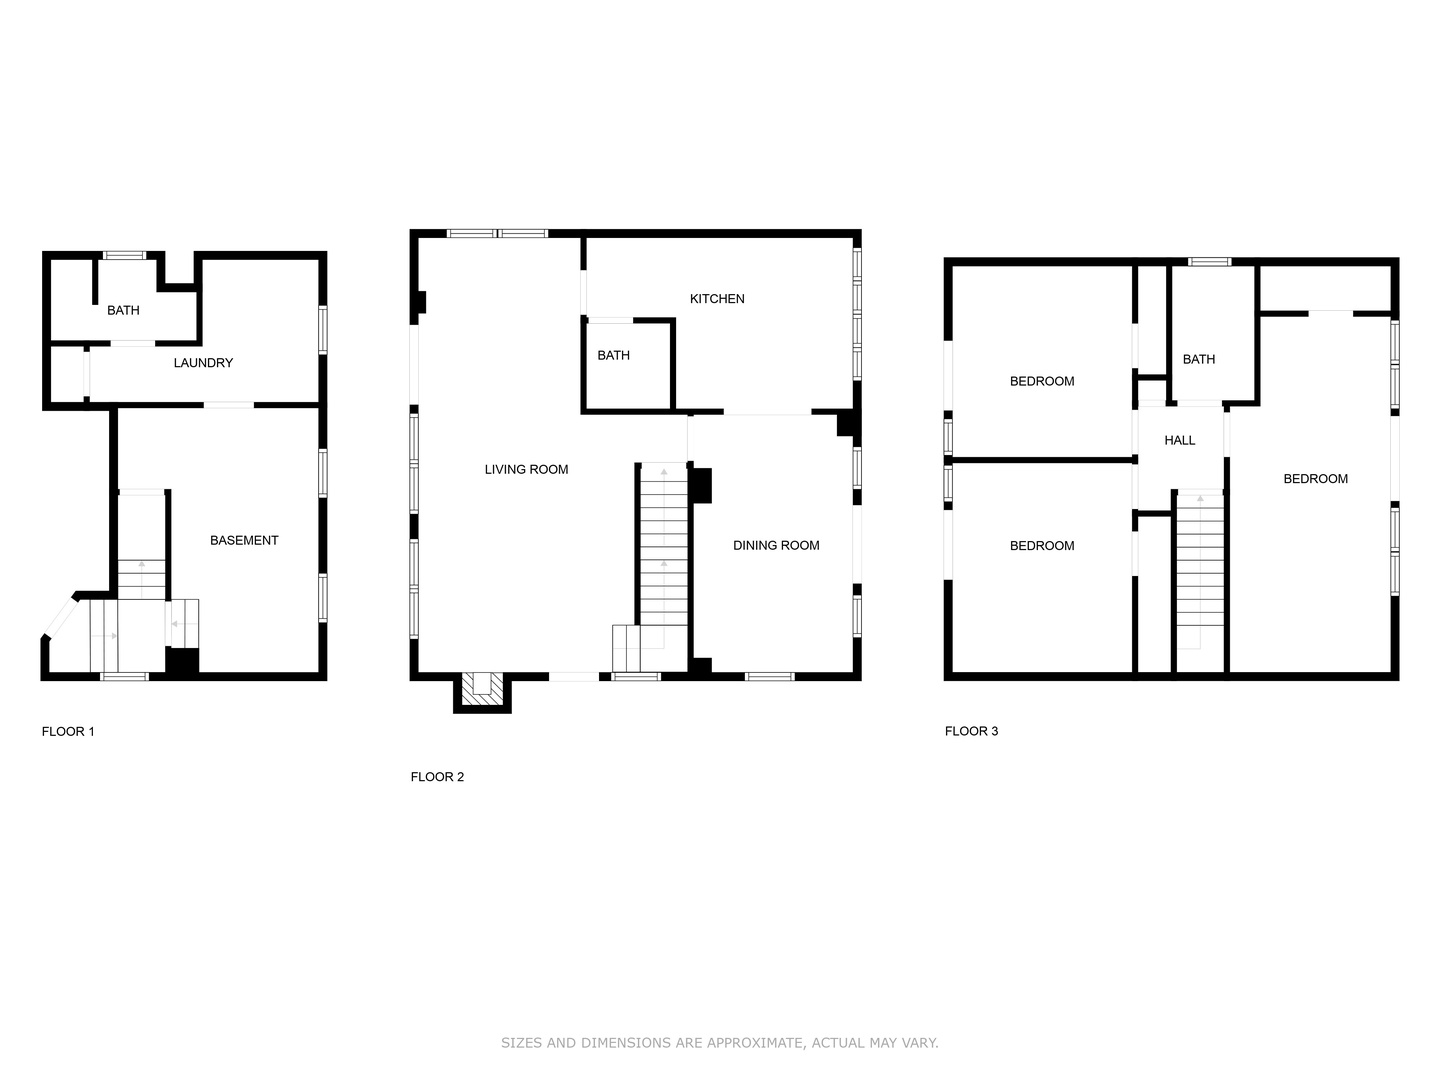 Layout of all 3 floors